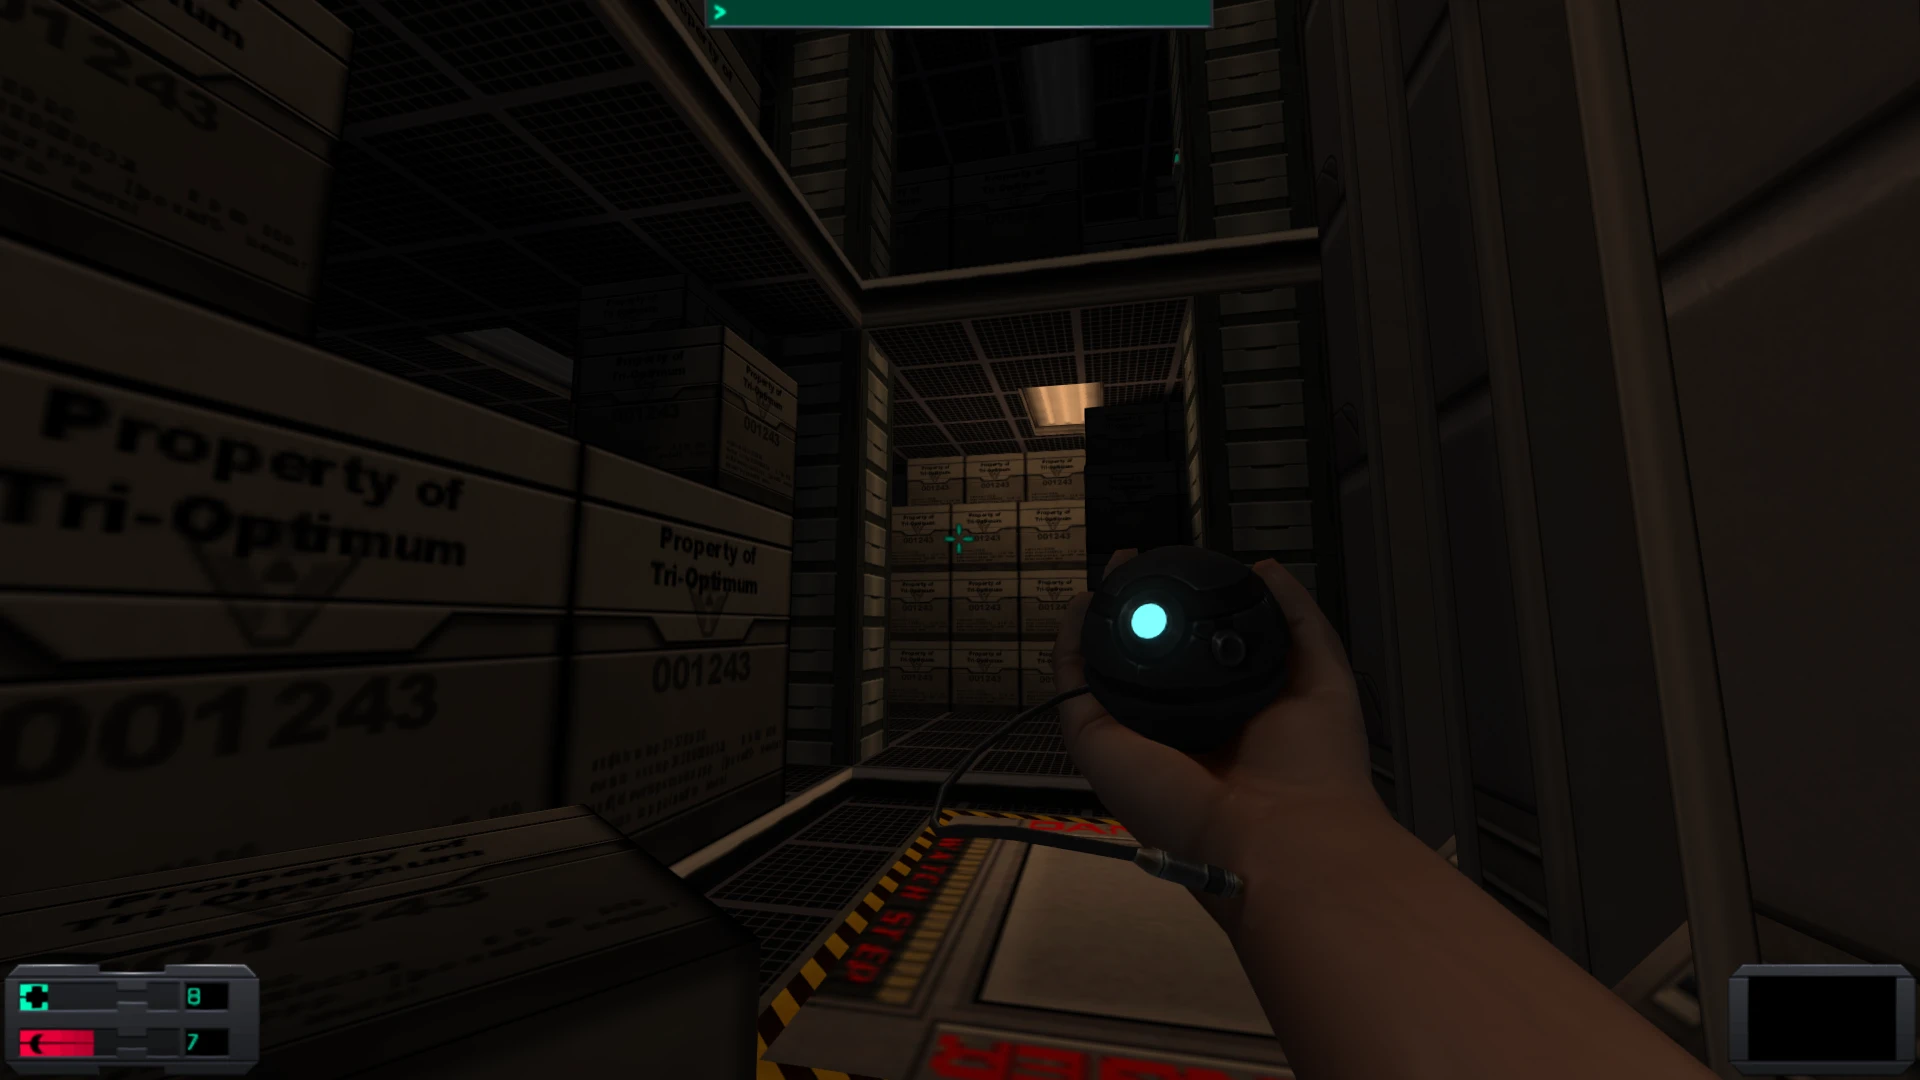 system shock 2 difficulty settings